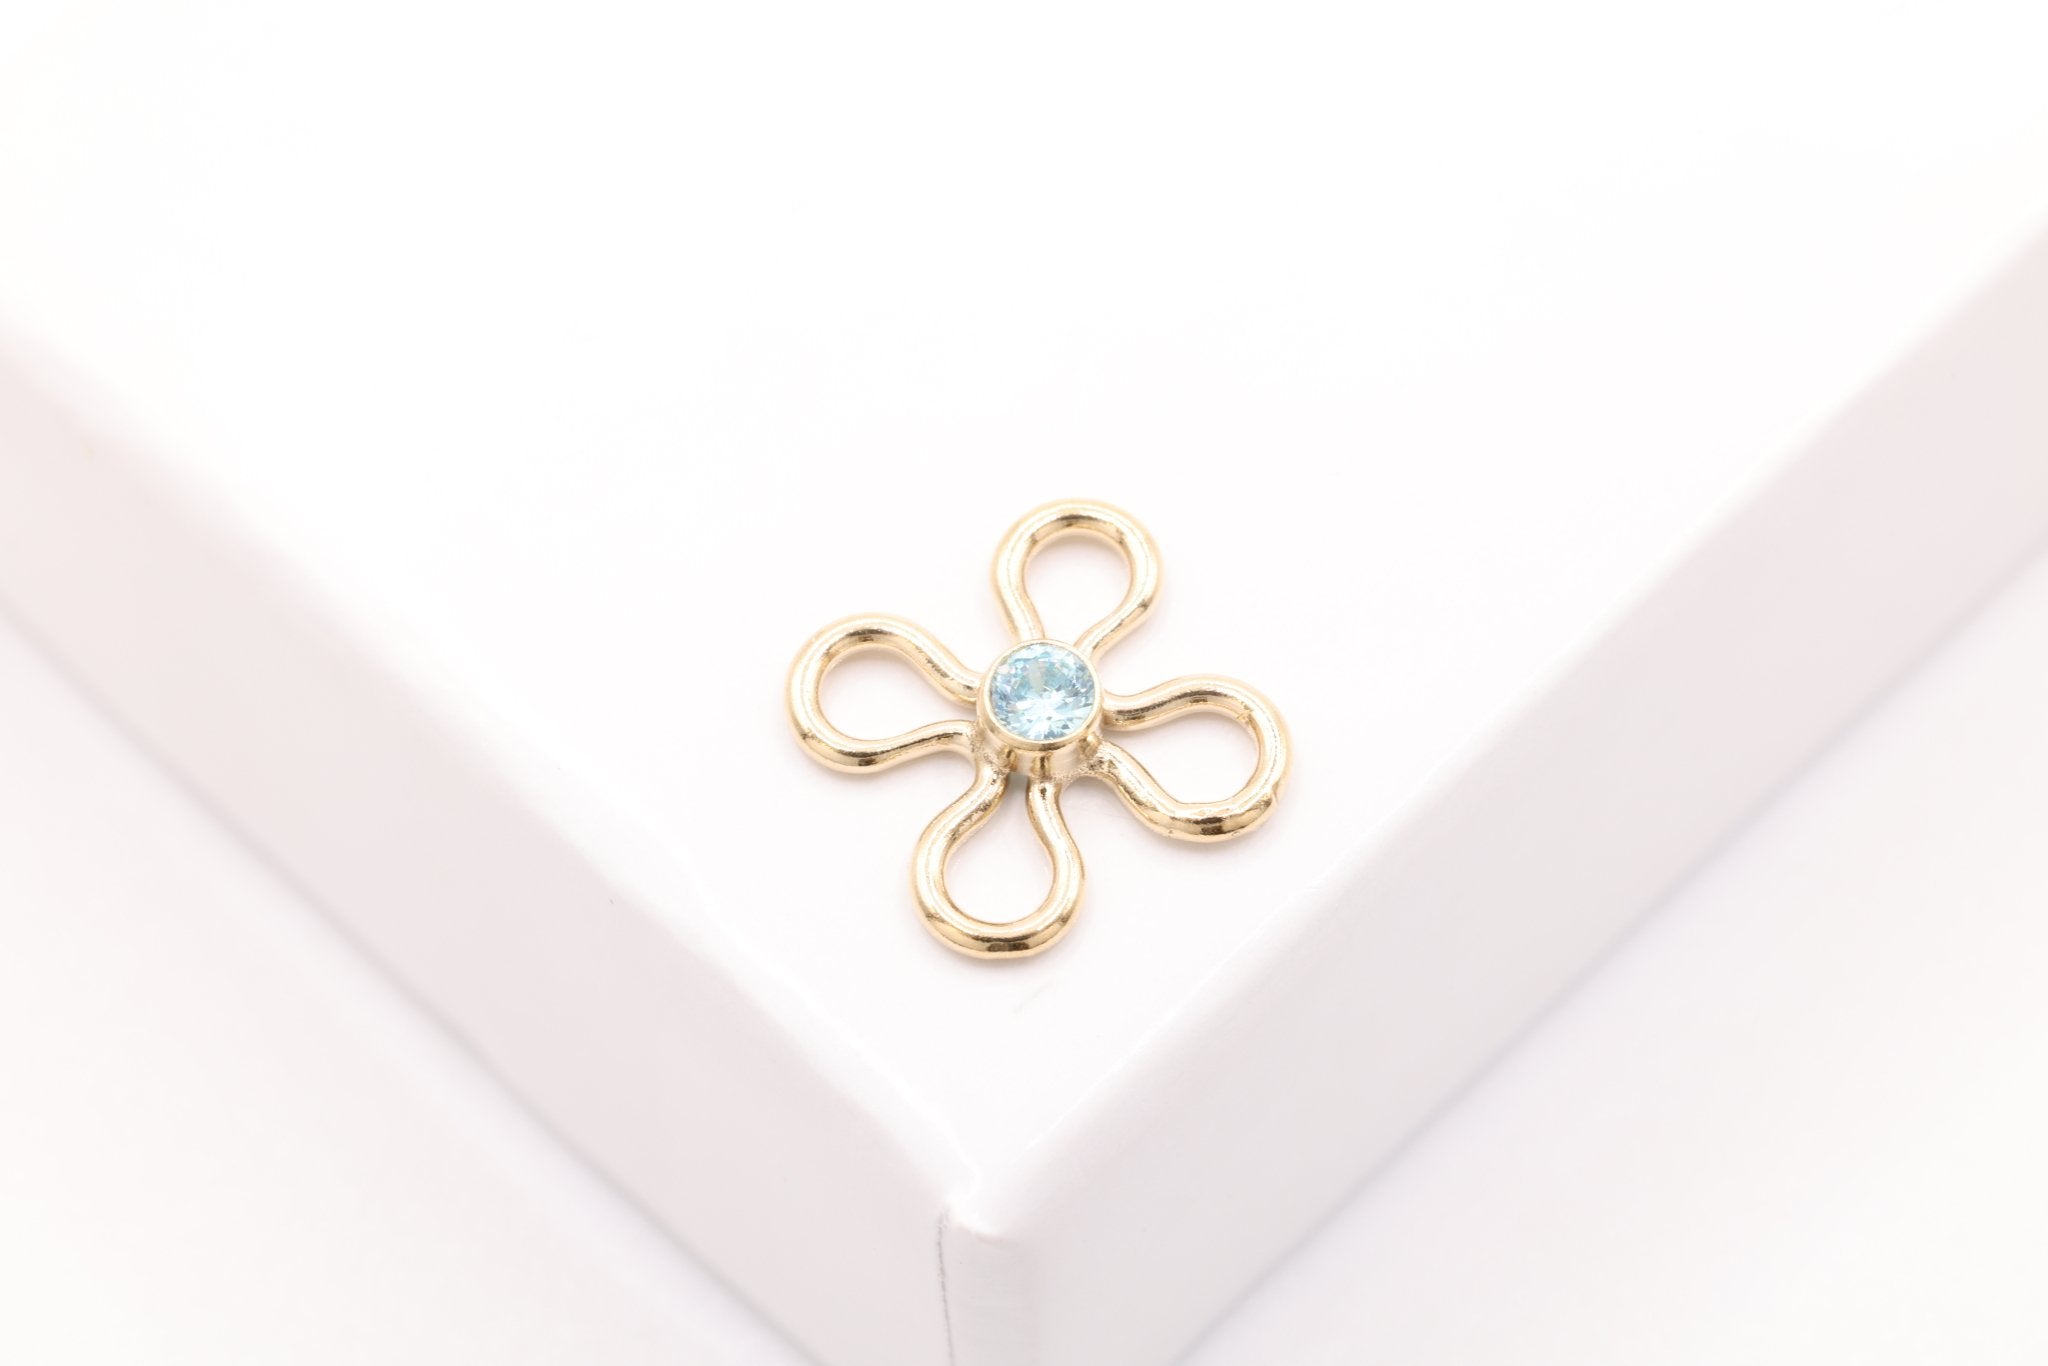 Flower Link, Aquamarine Blue CZ Gold-Filled Wholesale Drop Charm, March Birthstone, Connector Charm - HarperCrown